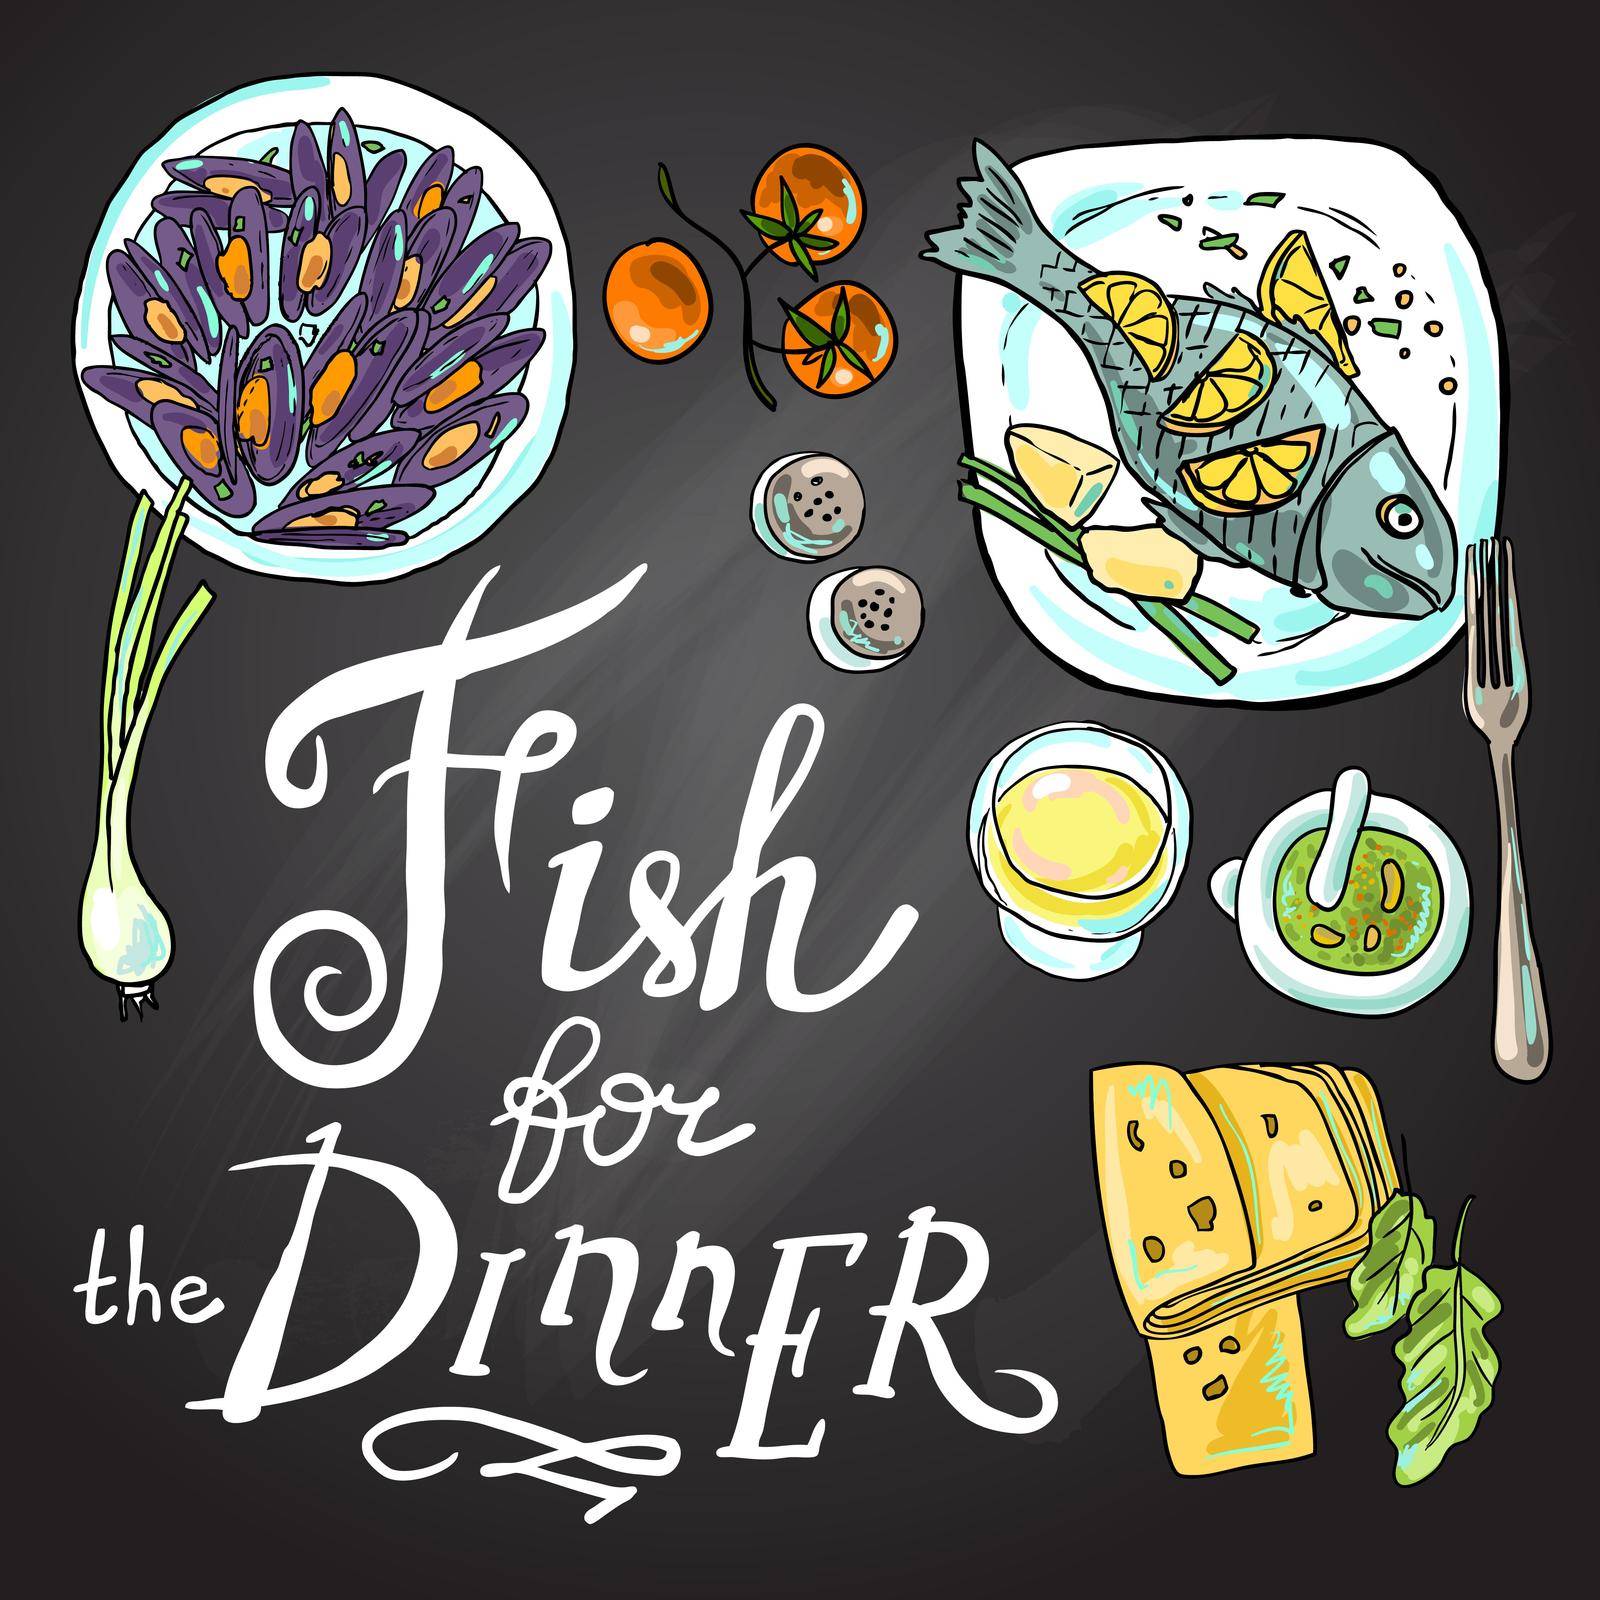 Hand drawn illustration fish for the dinner on the chalkboard